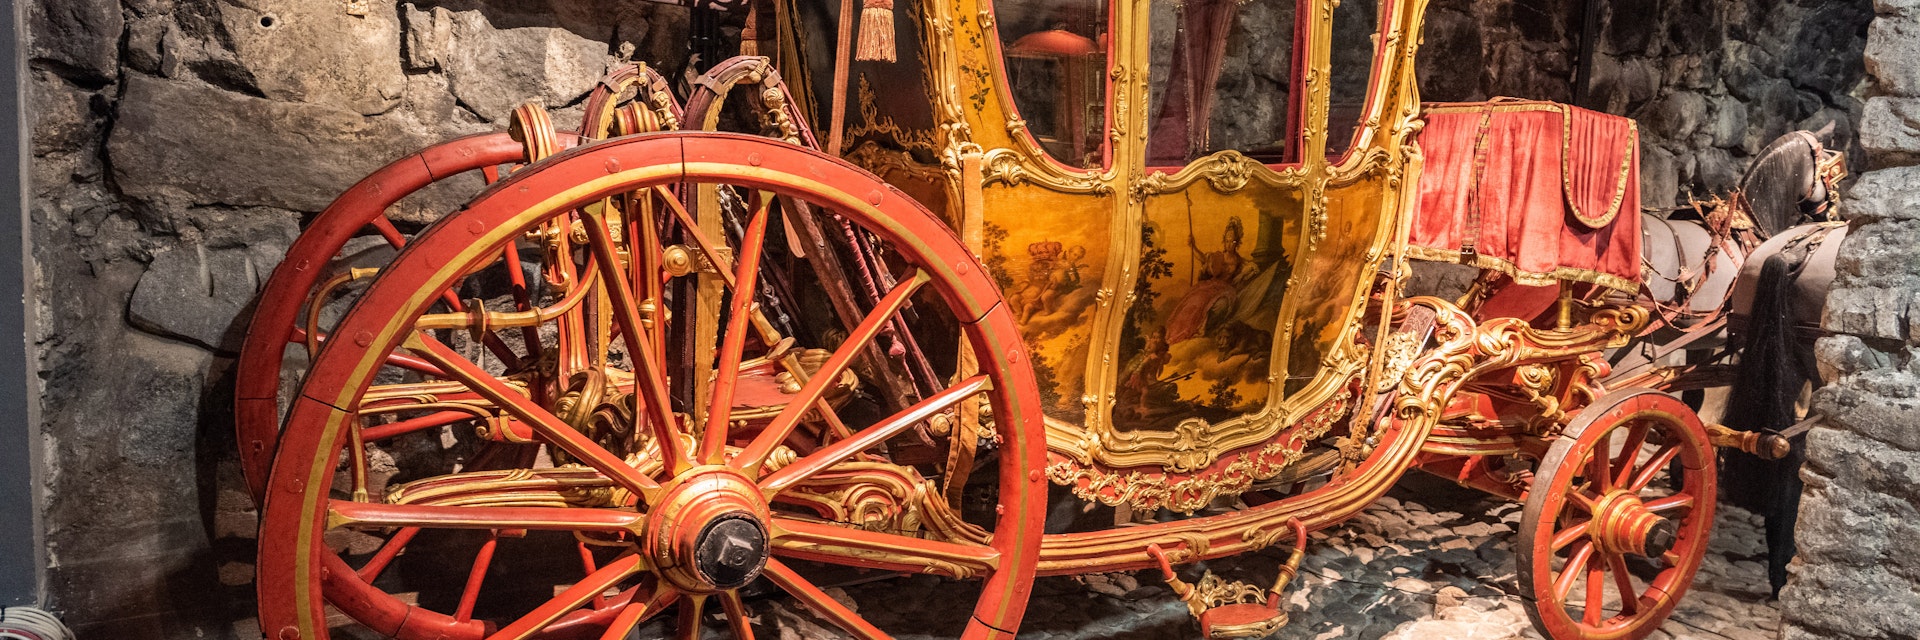 Historic carriage on display at the Royal Armoury in Stockholm.